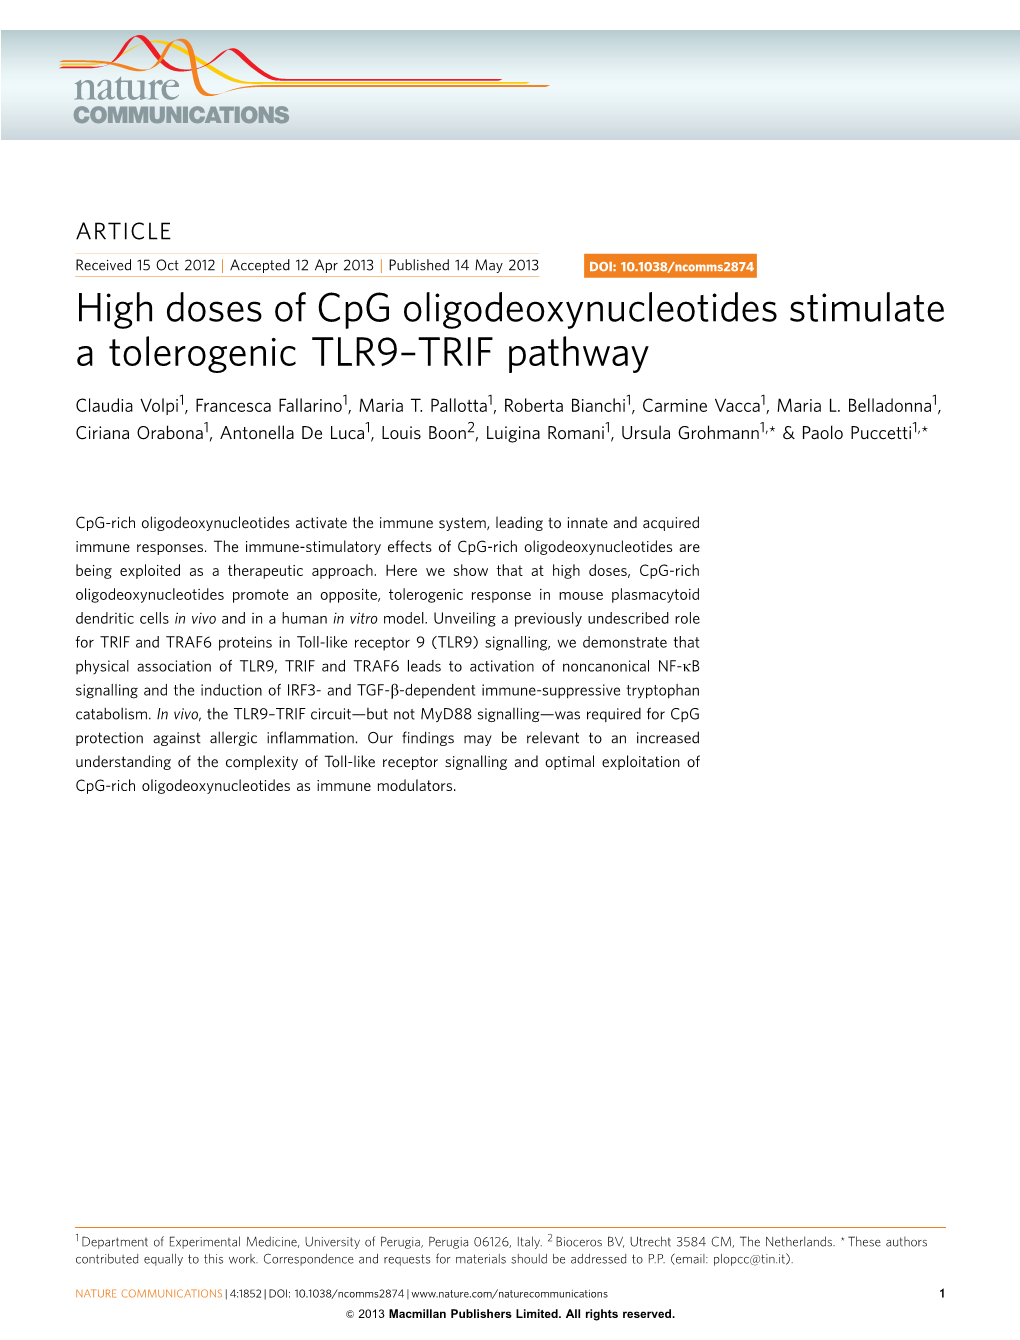 High Doses of Cpg Oligodeoxynucleotides Stimulate a Tolerogenic TLR9–TRIF Pathway